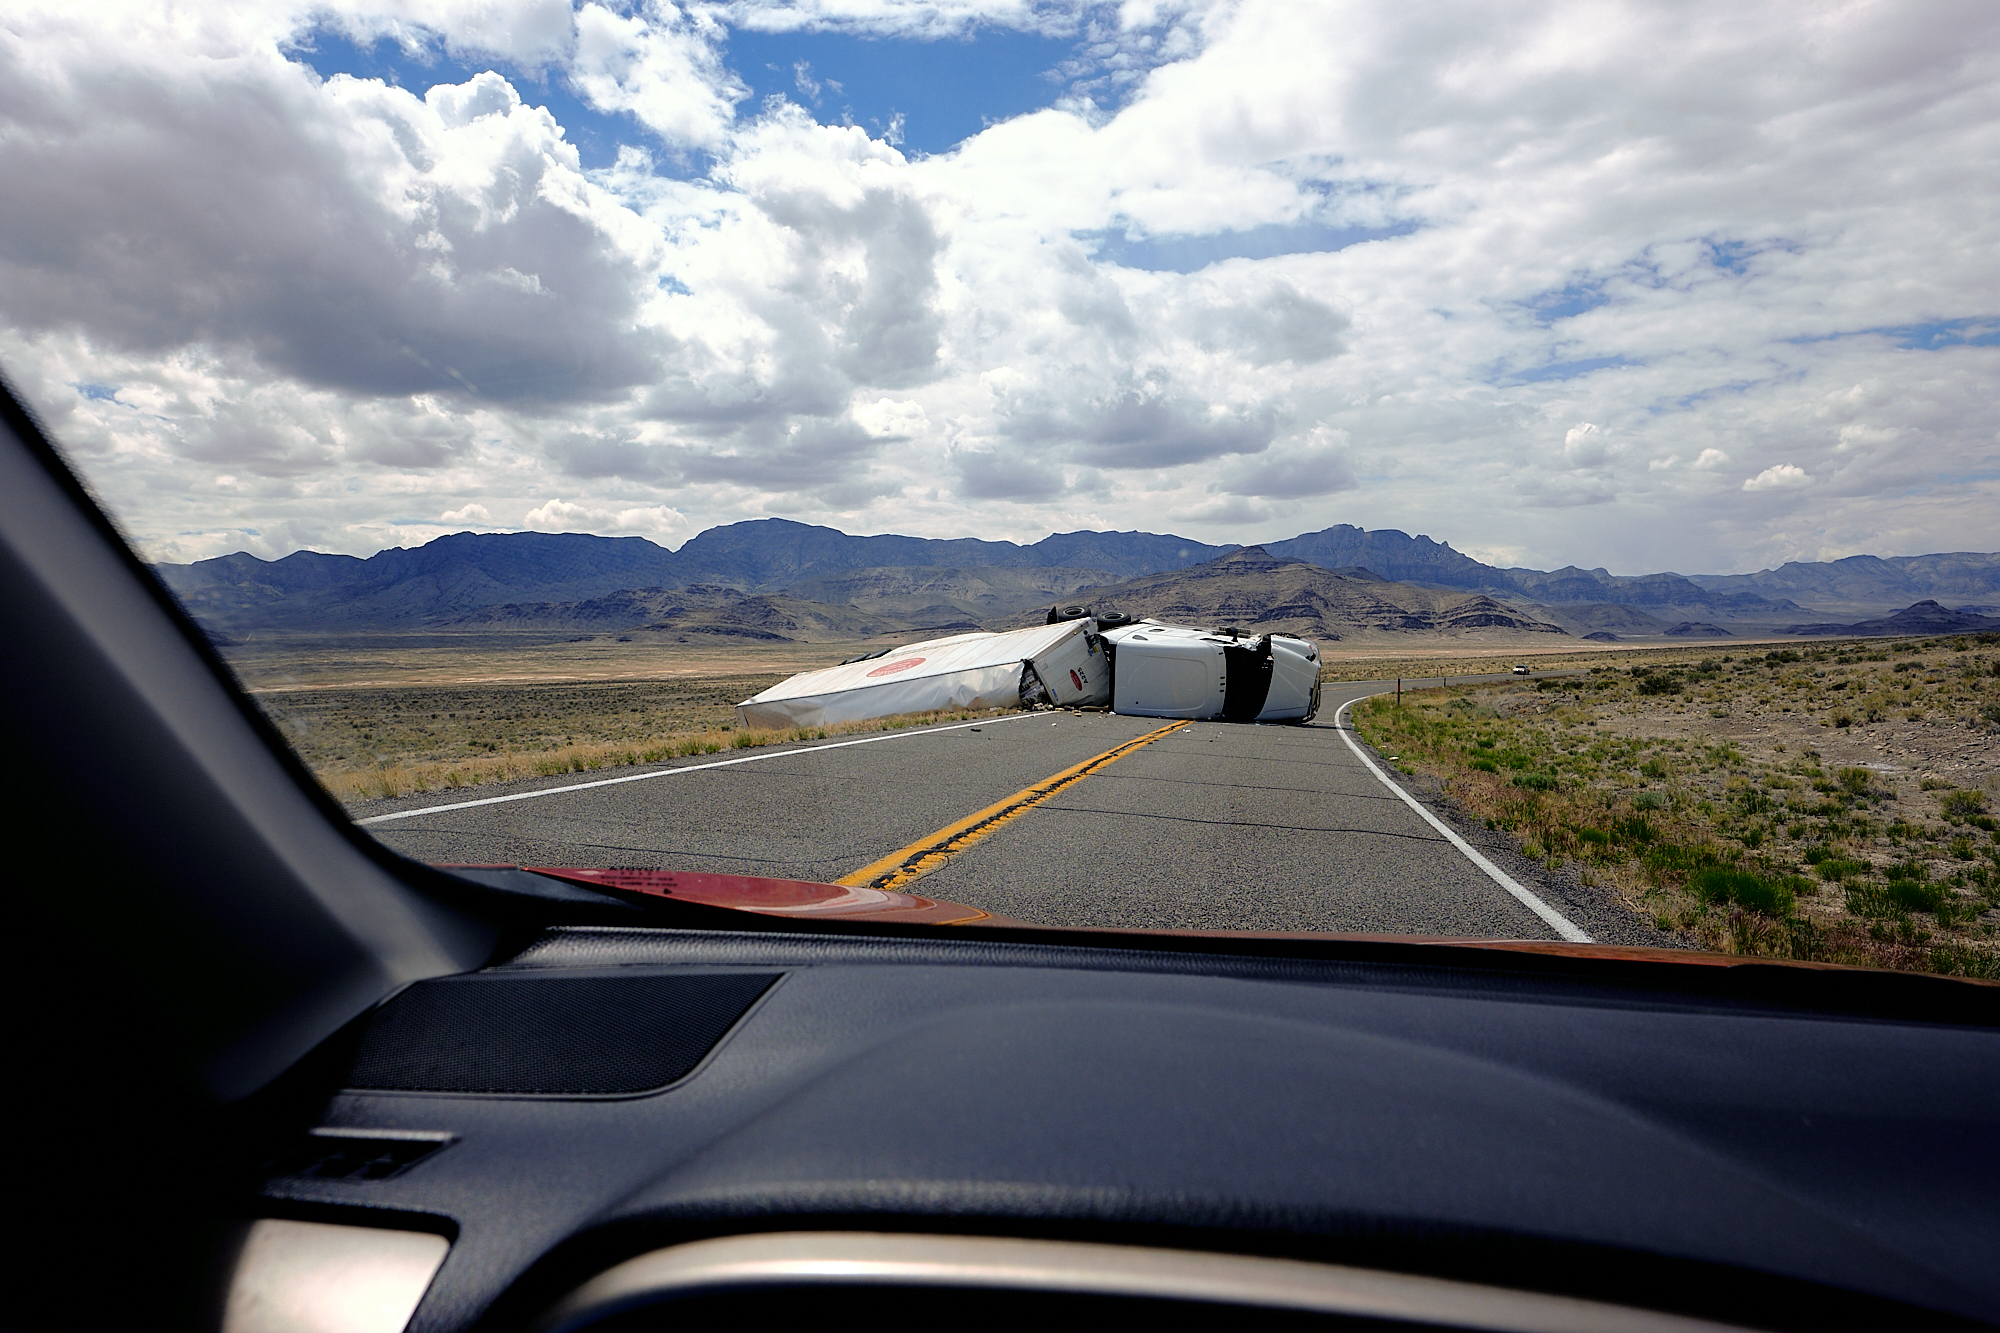  About 60 miles west of Delta, Utah I was the second car to arrive at a recently flipped truck. No cell service here so I sped back a few miles to find a whiff of signal while standing on my car to call 911. The nearest officer was 50 miles away. The